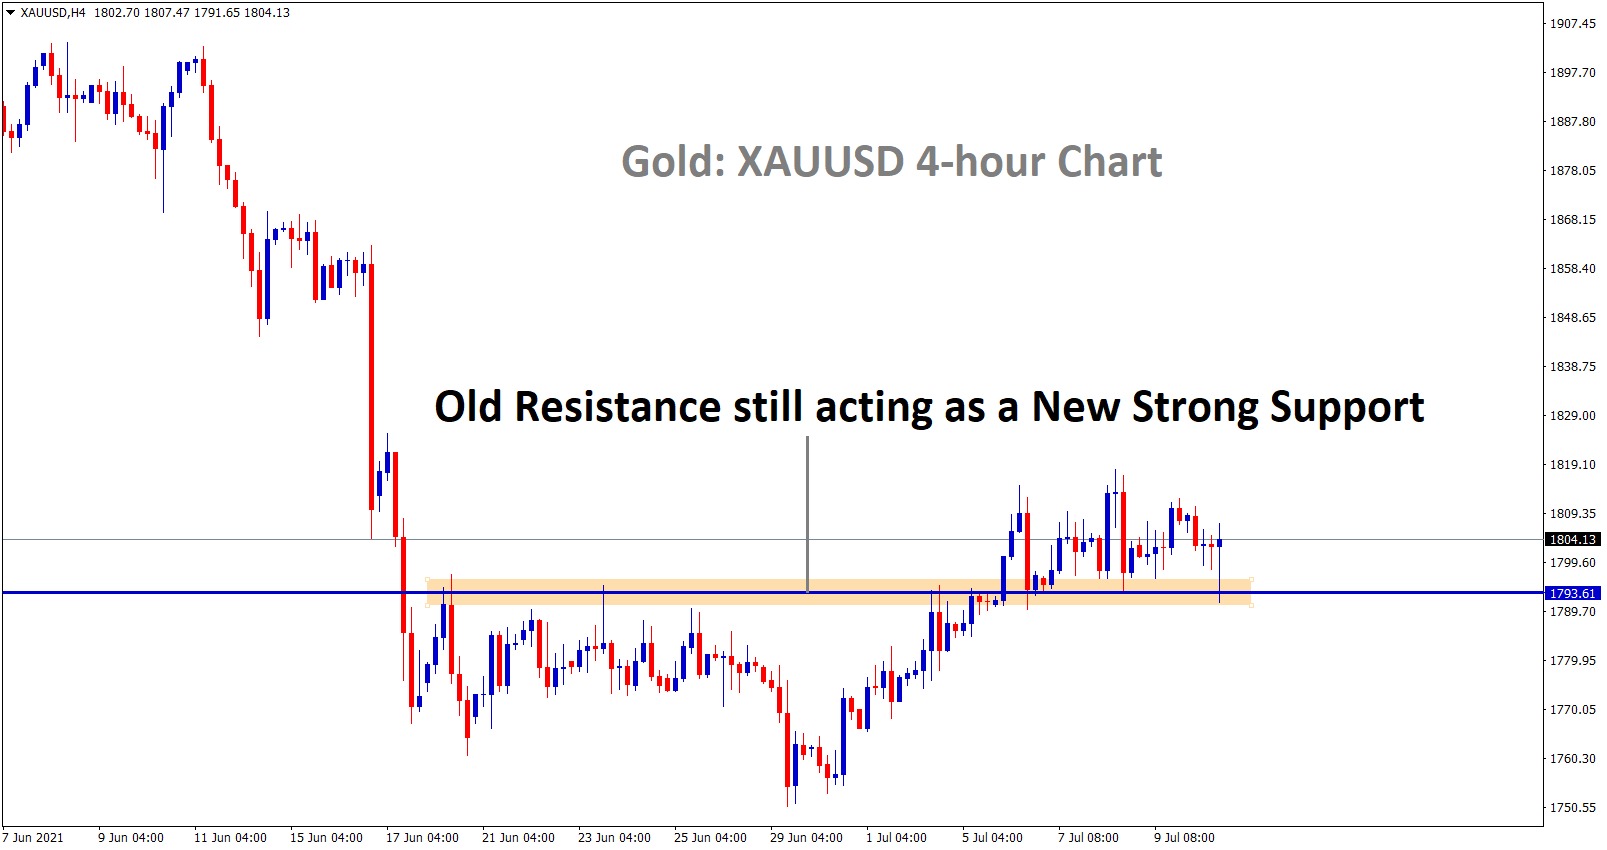 Old resistance still acting as a new strong support on gold price chart